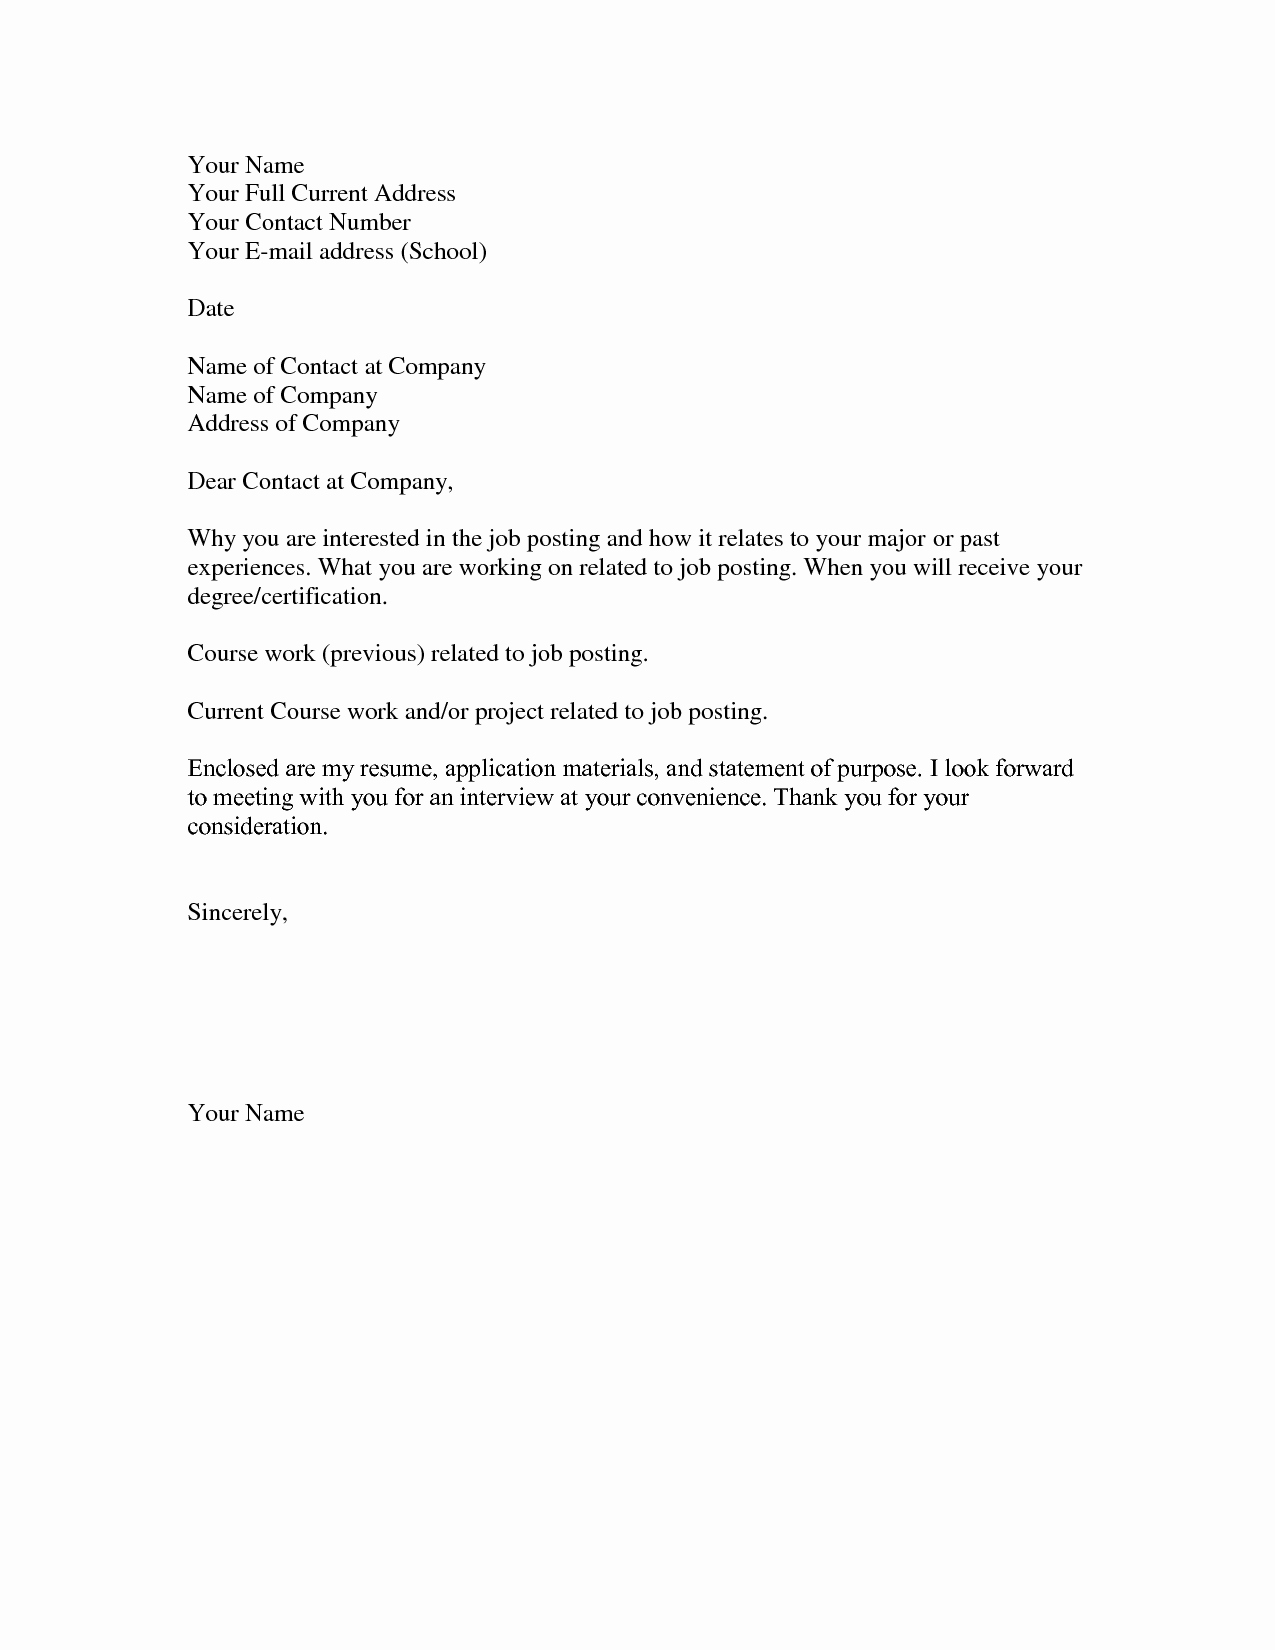 Basic Cover Letter Examples